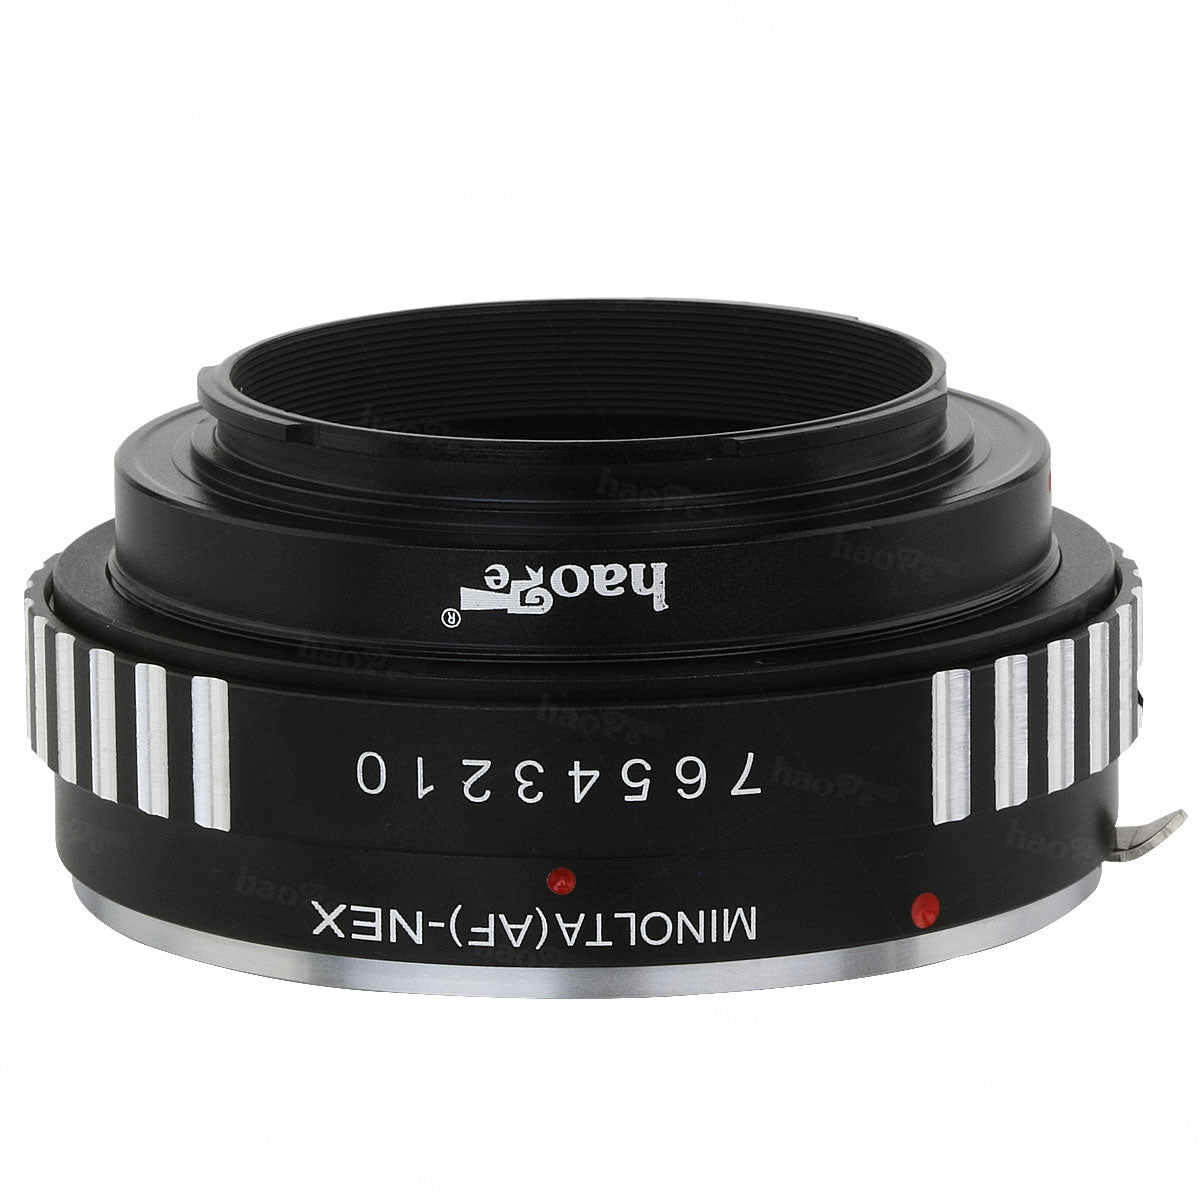 Haoge Lens Mount Adapter for Sony Alpha Minolta A-type Mount Lens to Sony E-mount NEX Camera such as NEX-3, NEX-5, NEX-5N, NEX-7, NEX-7N, NEX-C3, NEX-F3, a6300, a6000, a5000, a3500, a3000, VG10, VG20